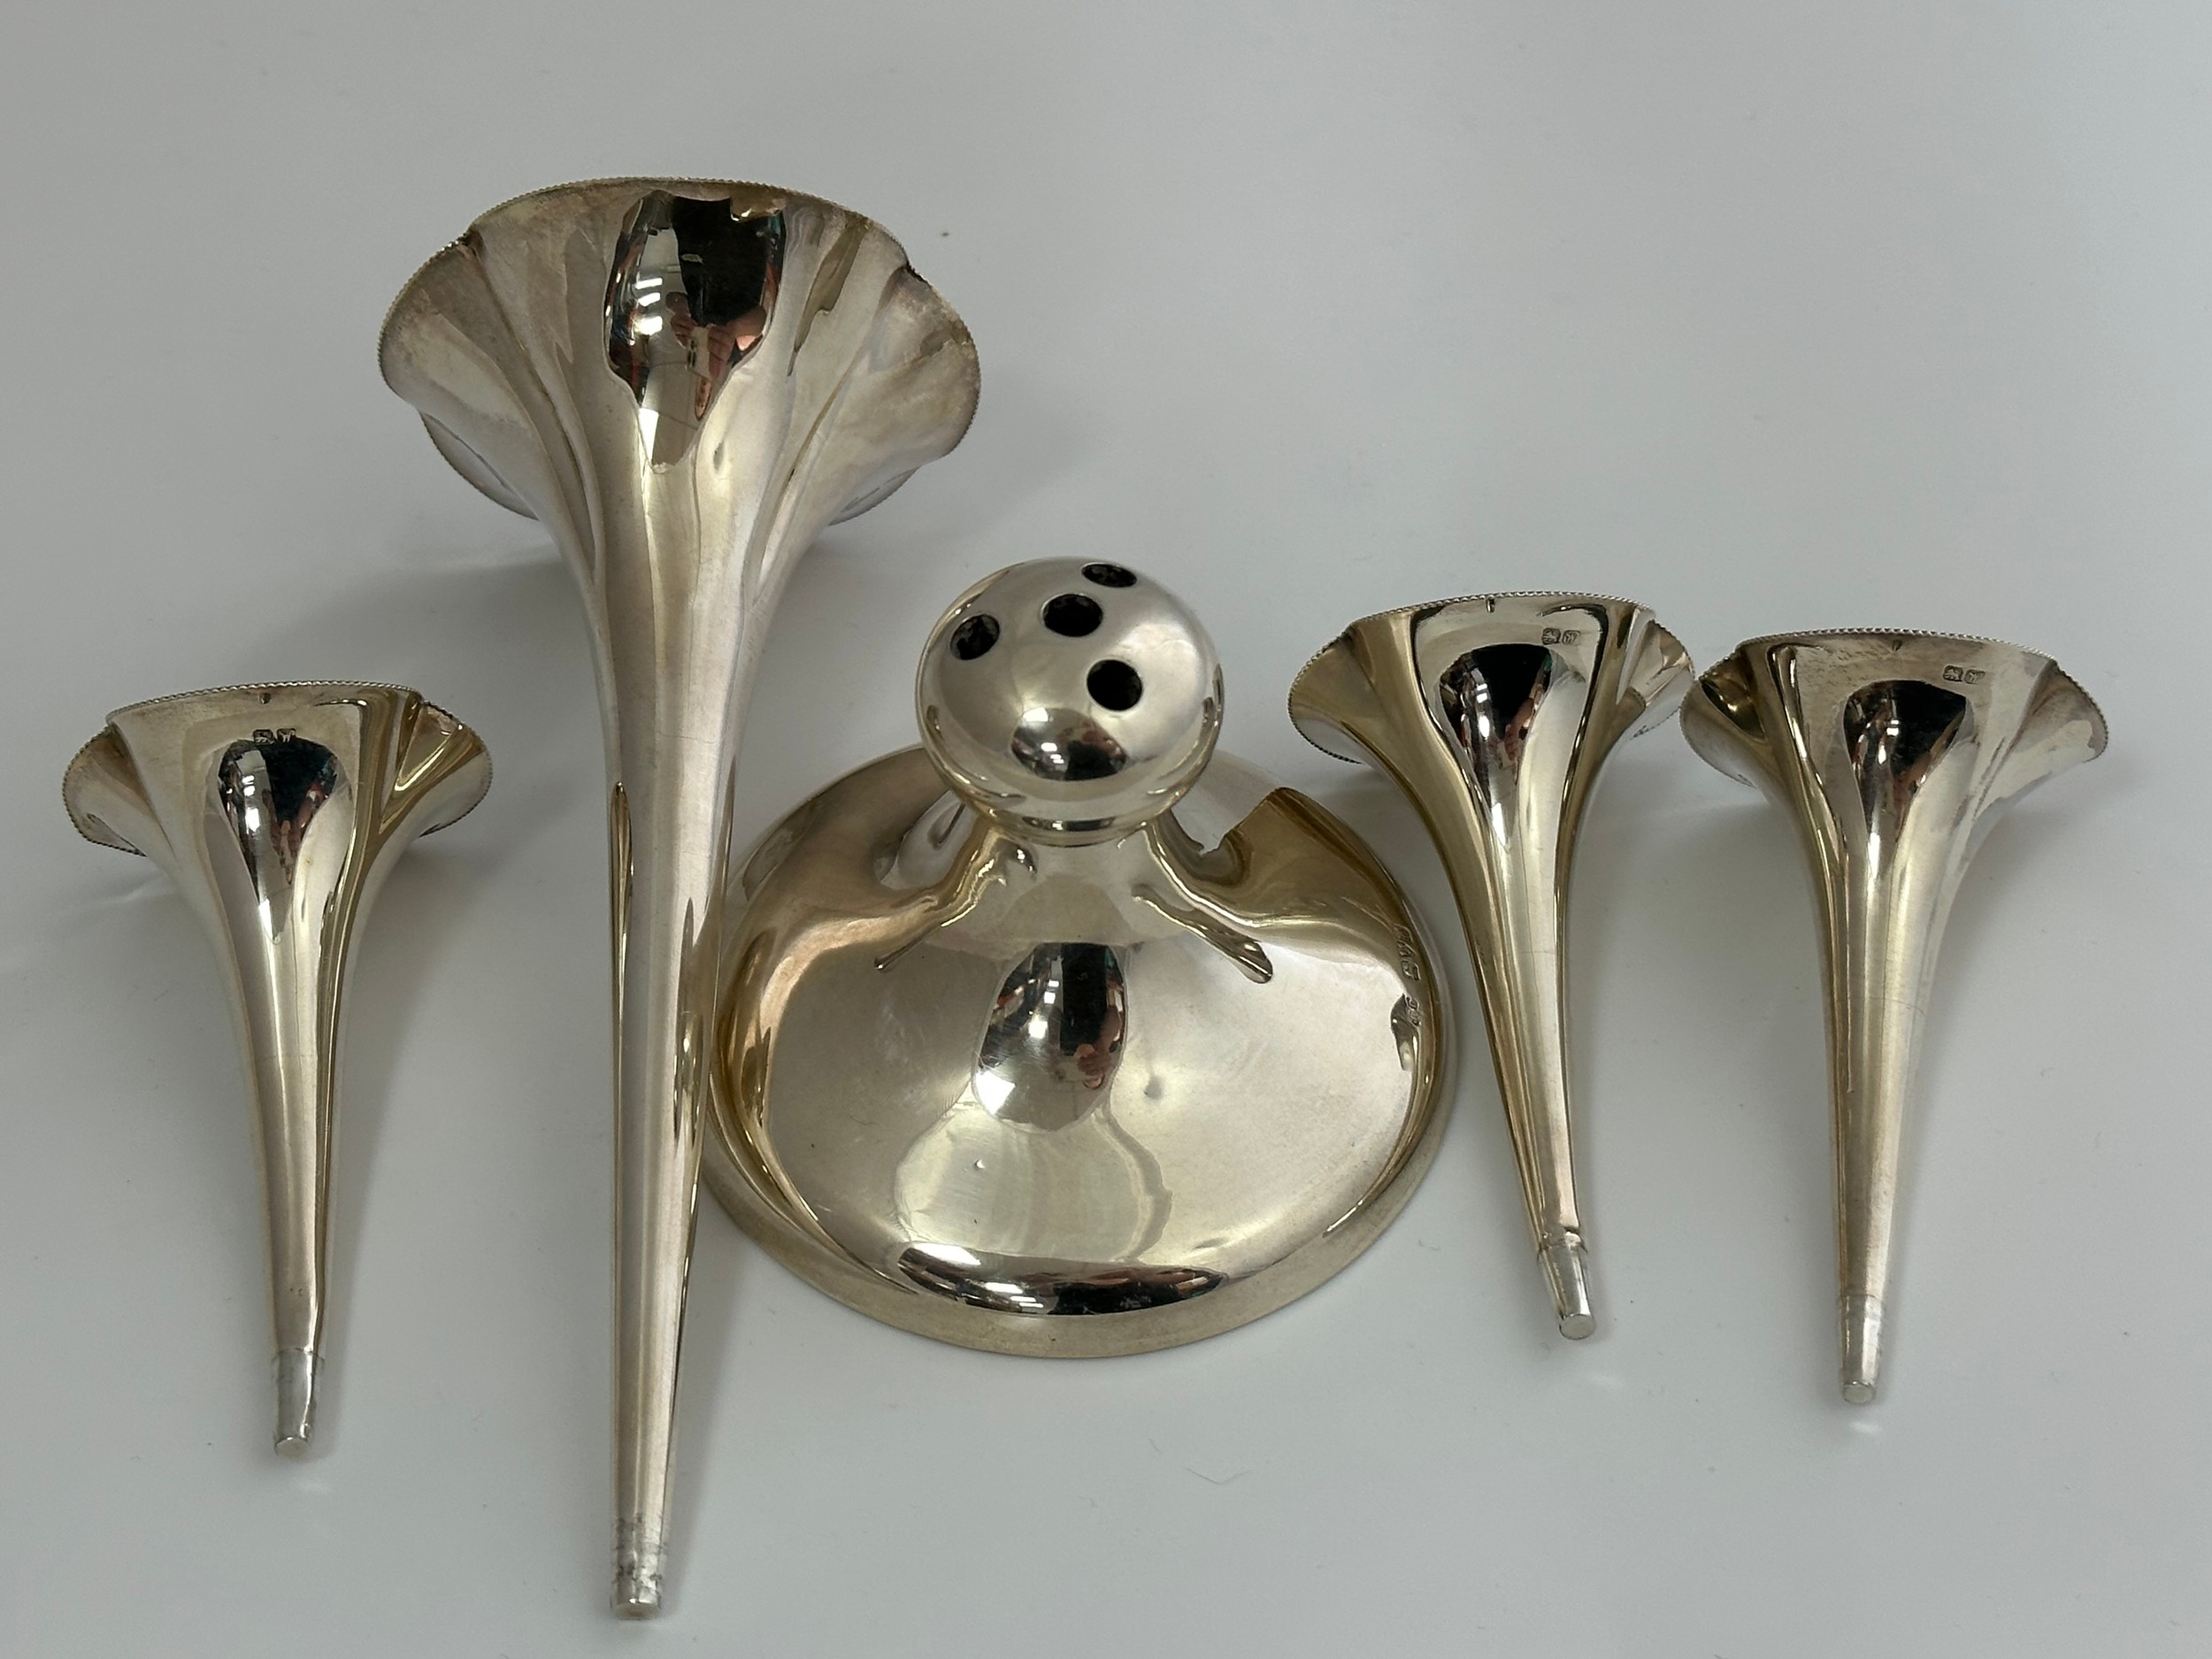 A sterling silver epergne by Jones and Crompton, with plain circular base, one large and 3 smaller - Image 4 of 5